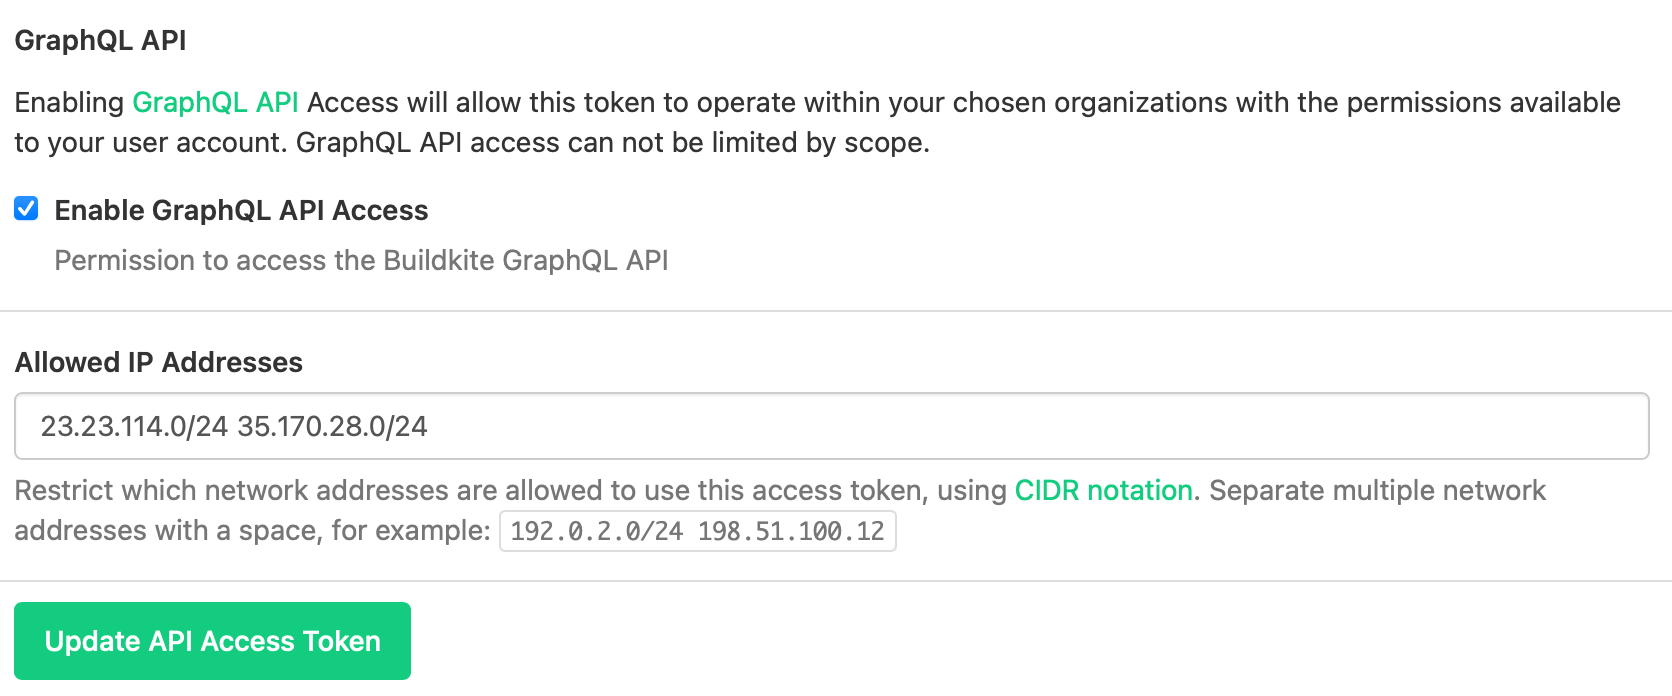 API Access Token edit page showing GraphQL API and Allowed IP Address configuration options